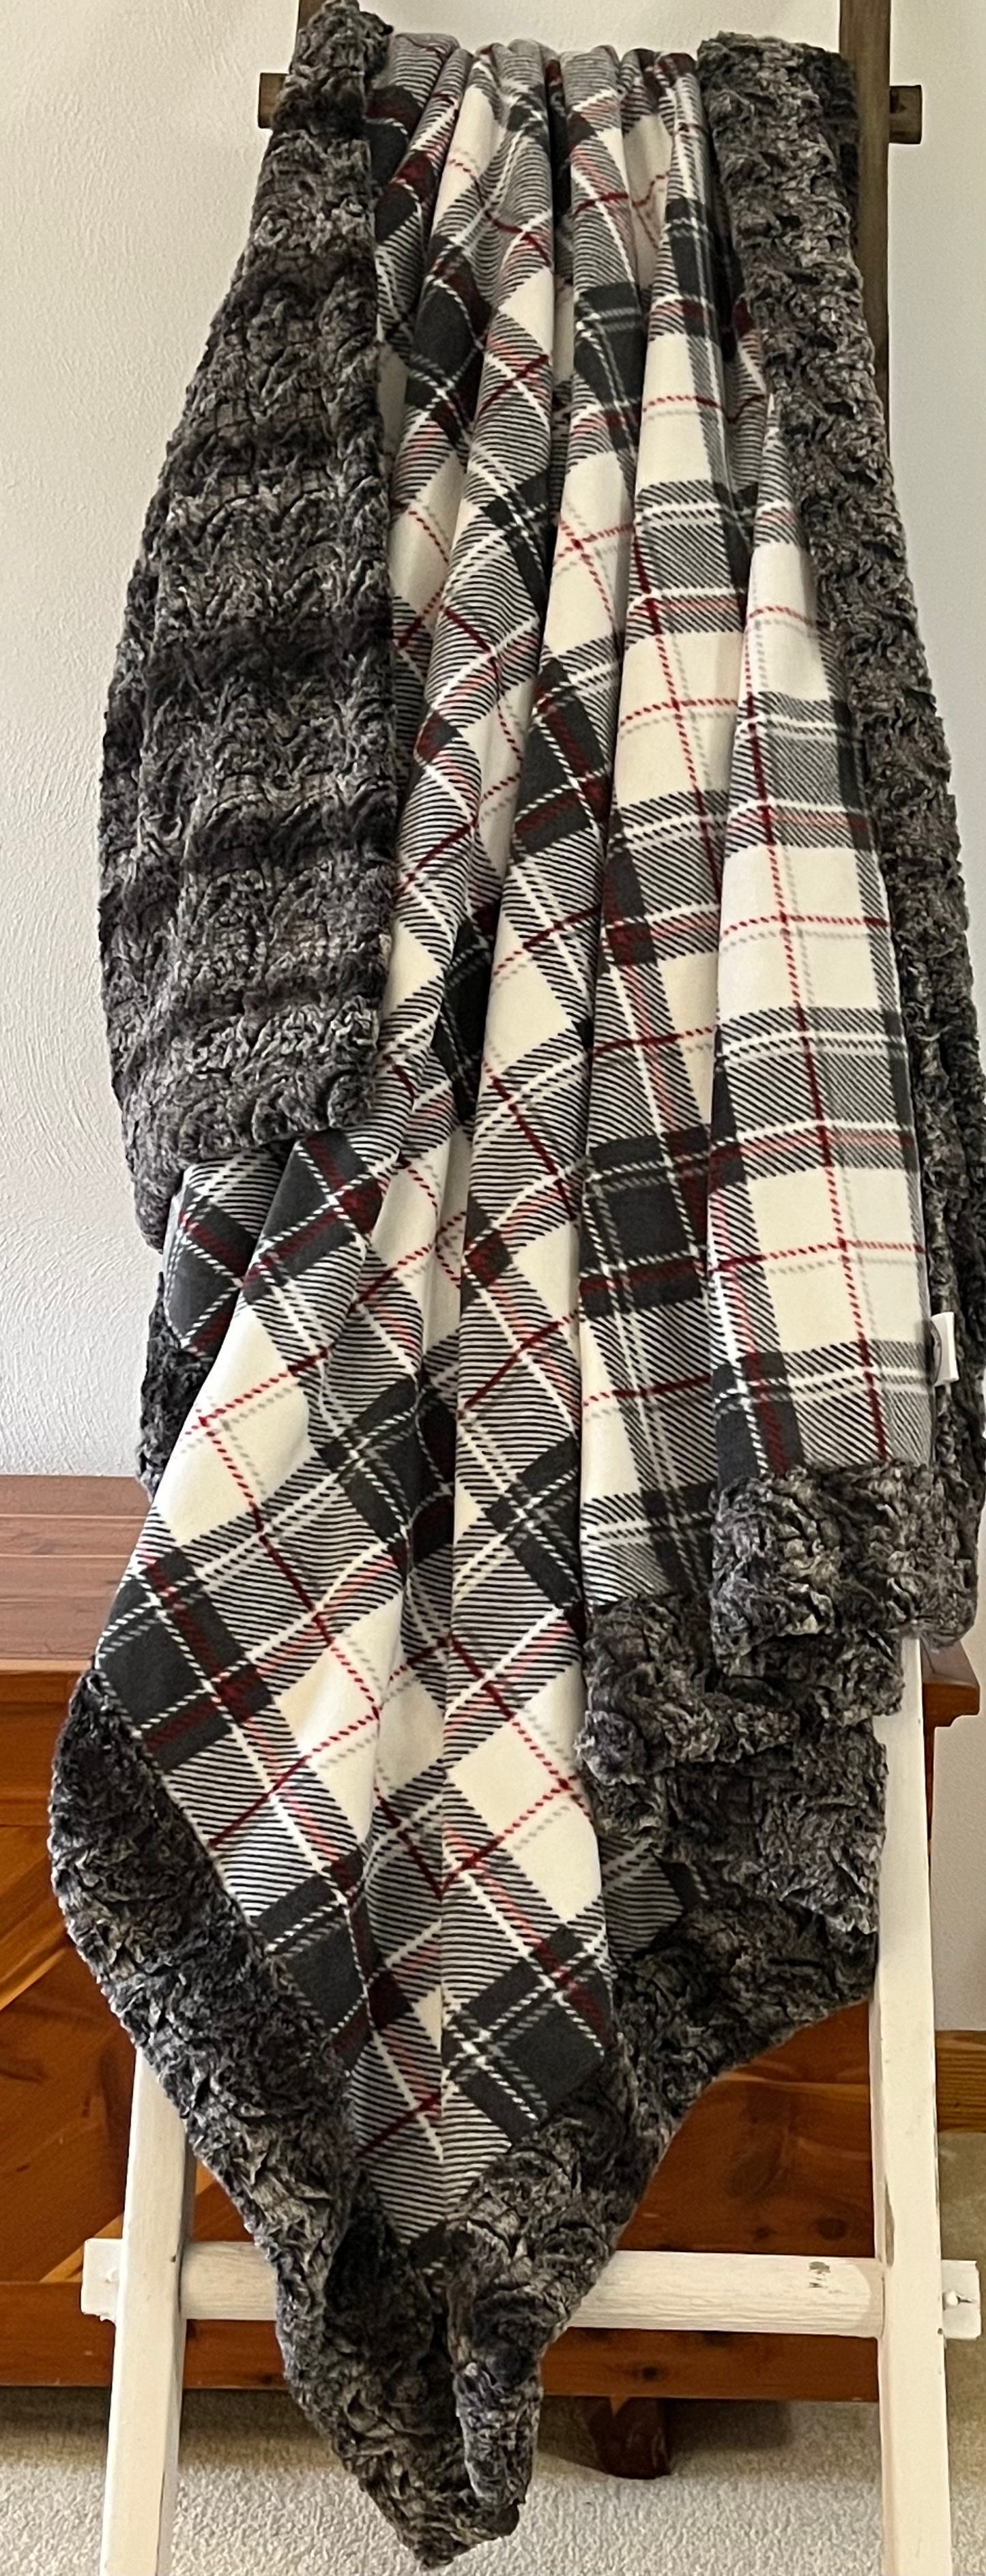 Hyber-Native Comfy Cabin Adult Throw